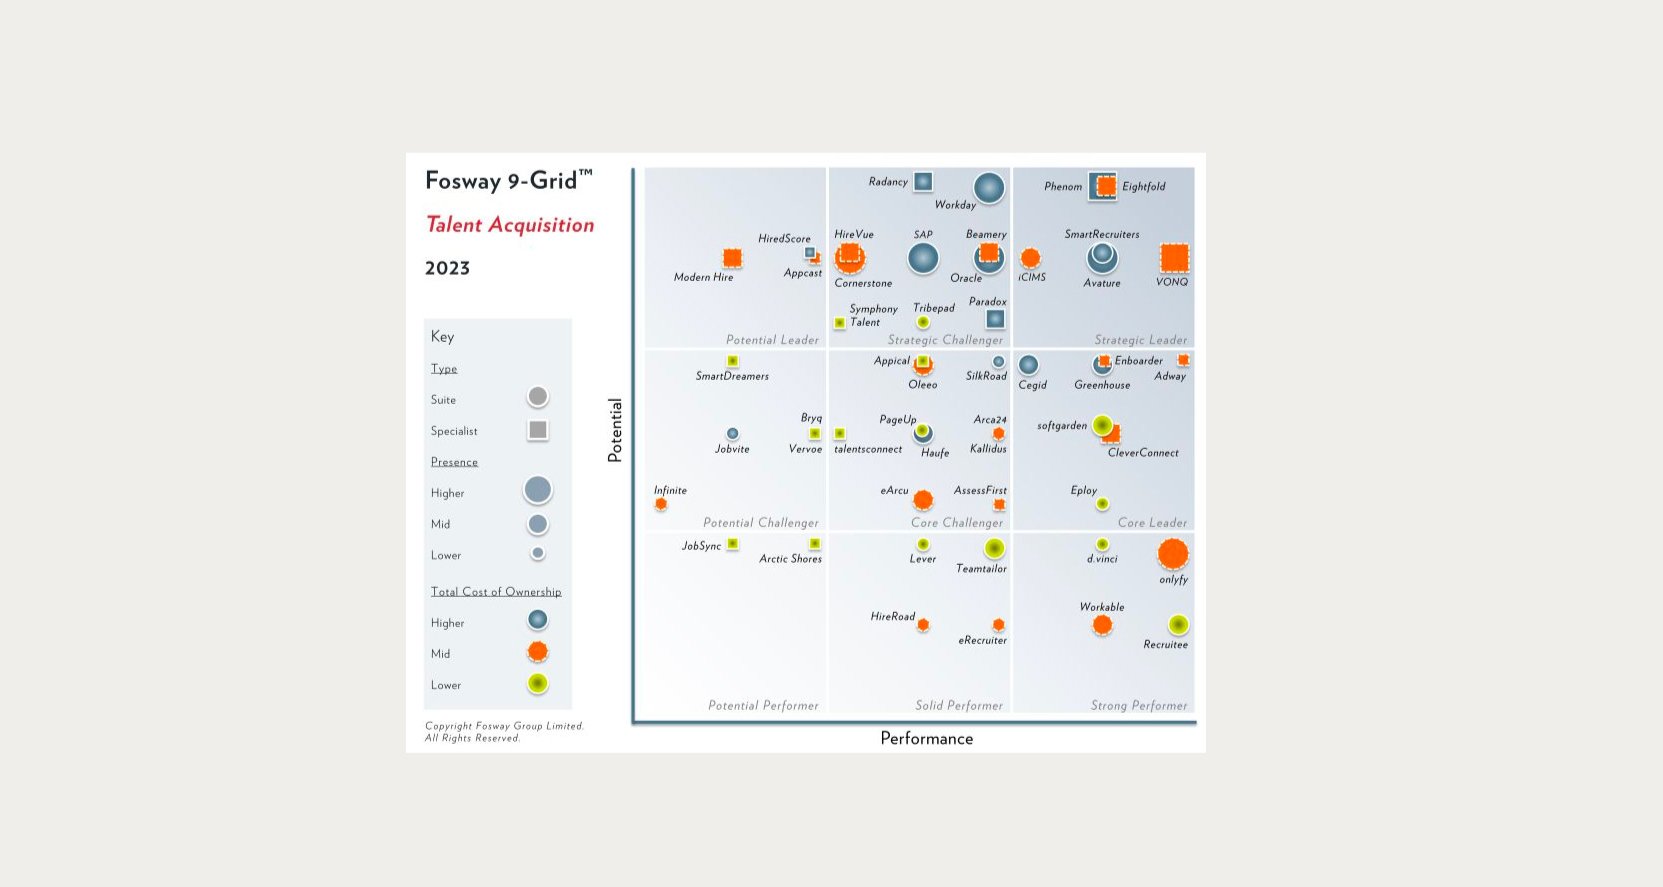 Fosway 9-Grid Talent Acquisition 